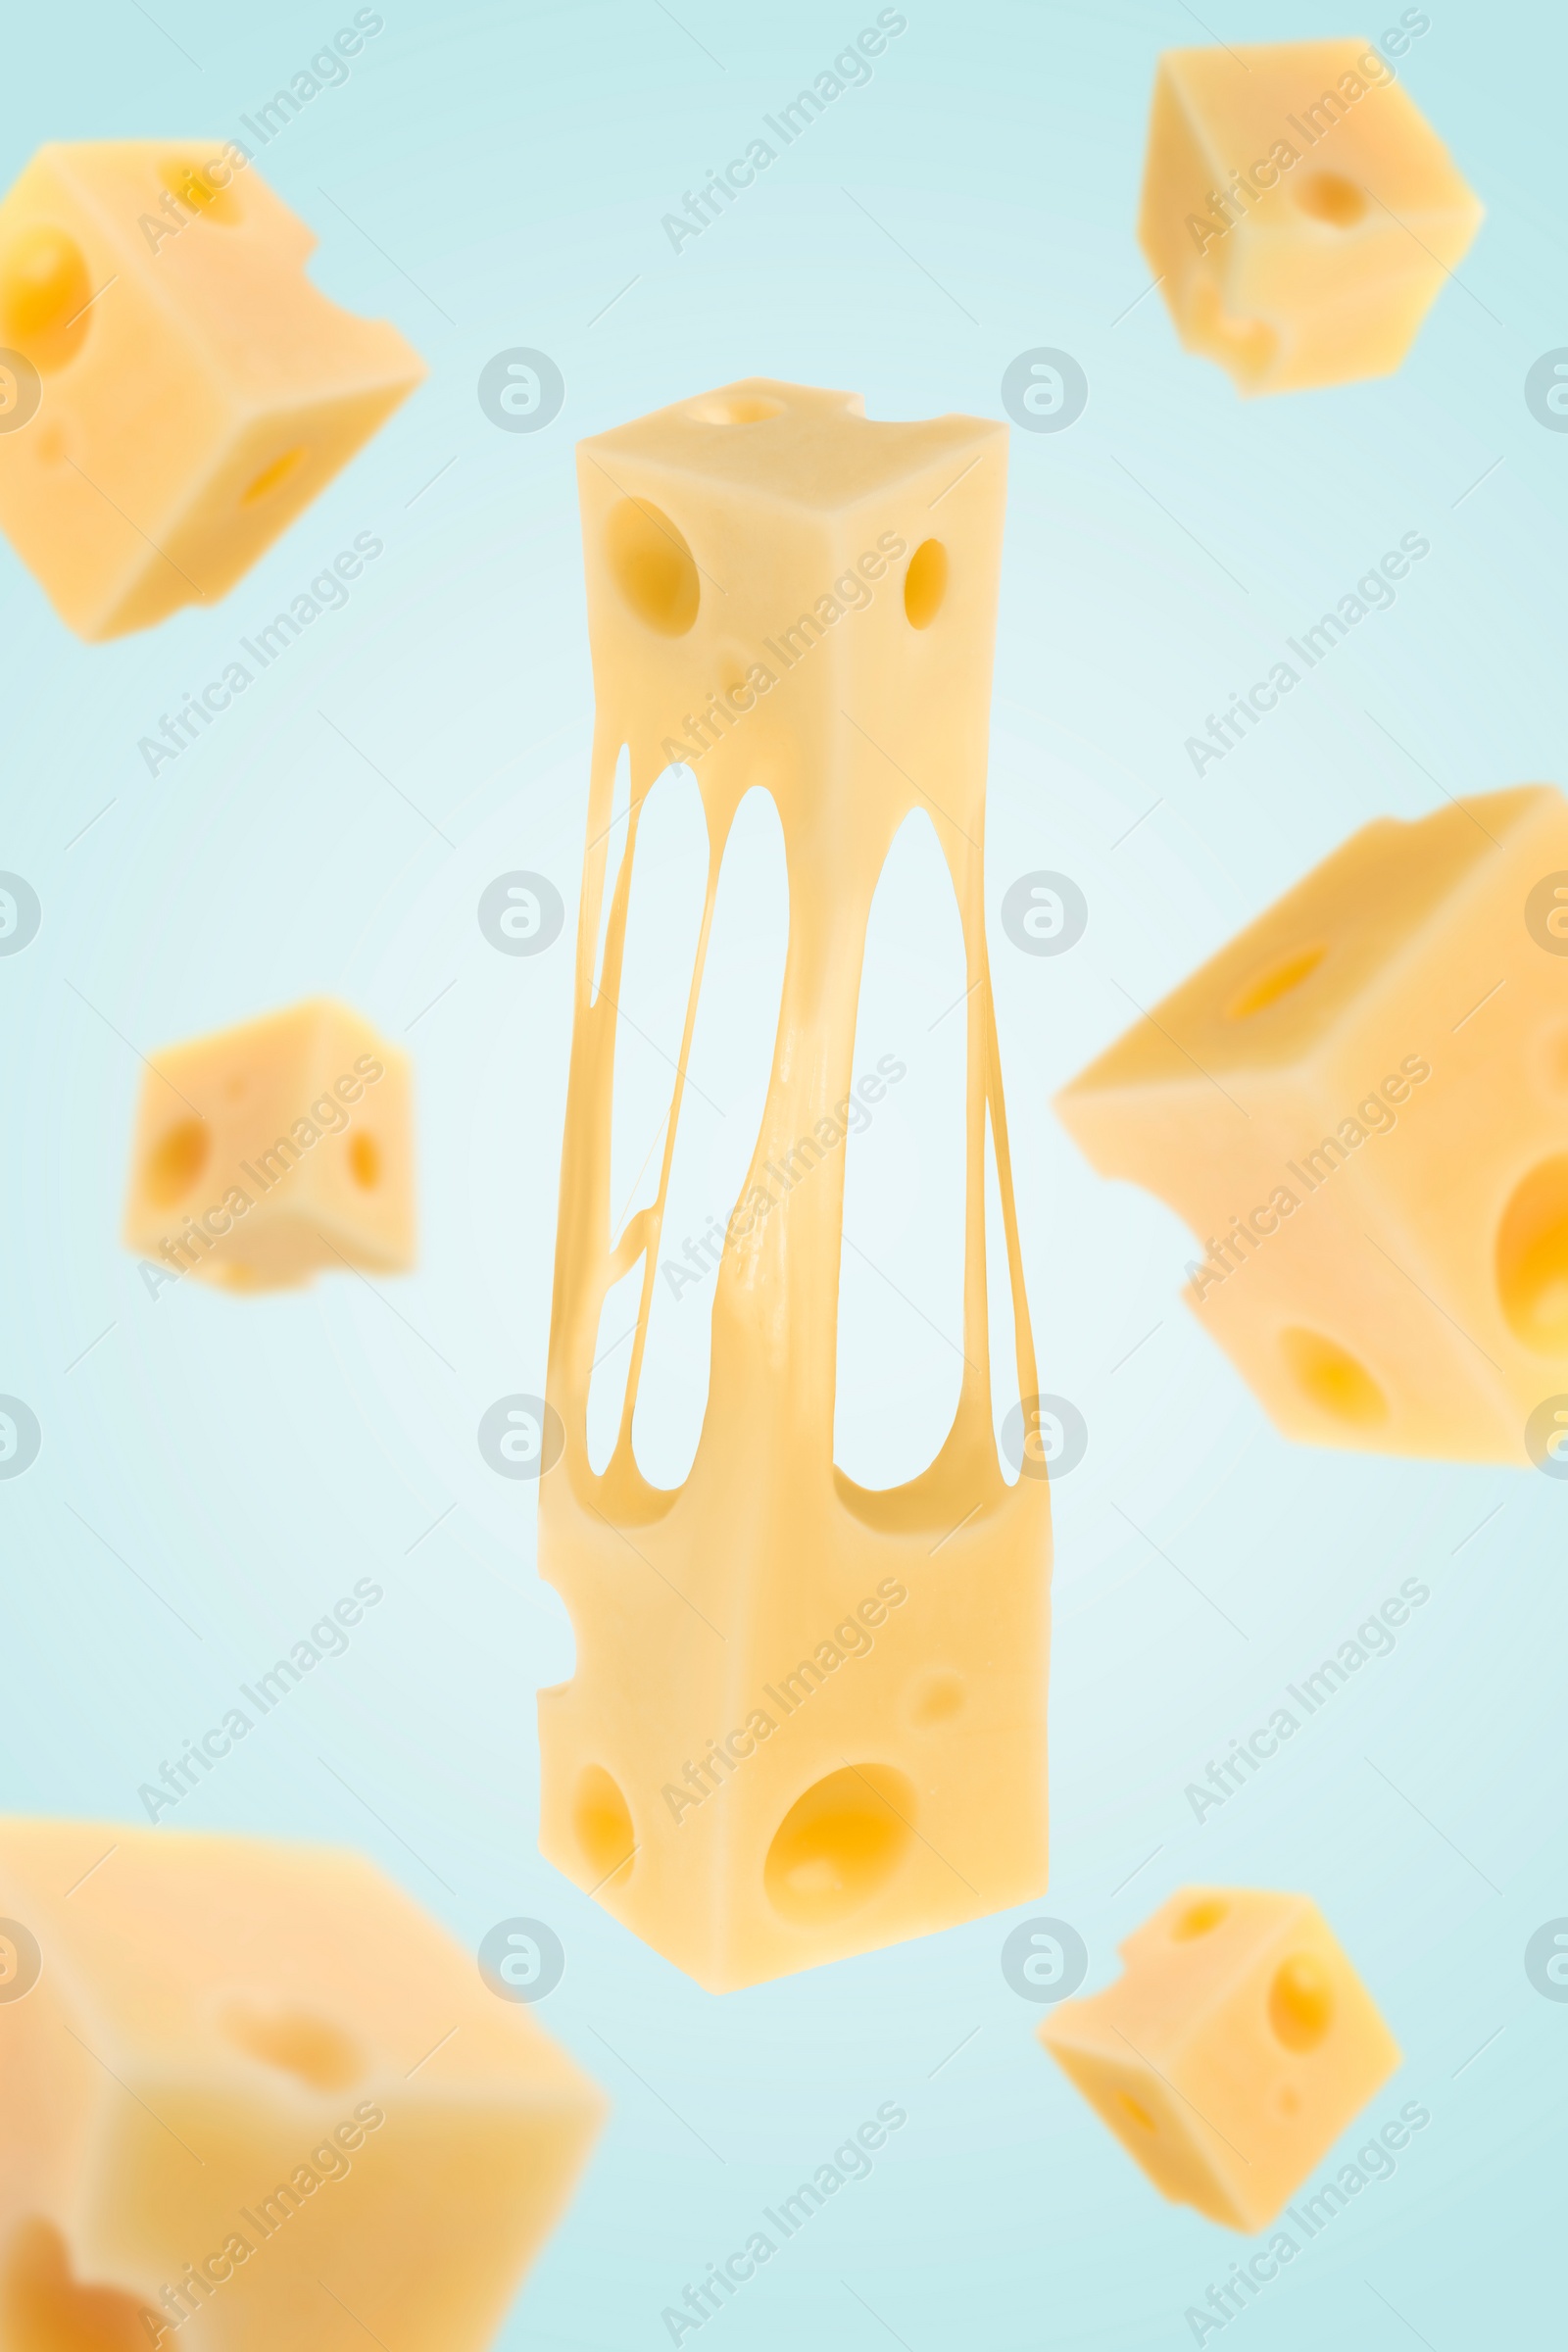 Image of Pieces of cheese falling on light blue background